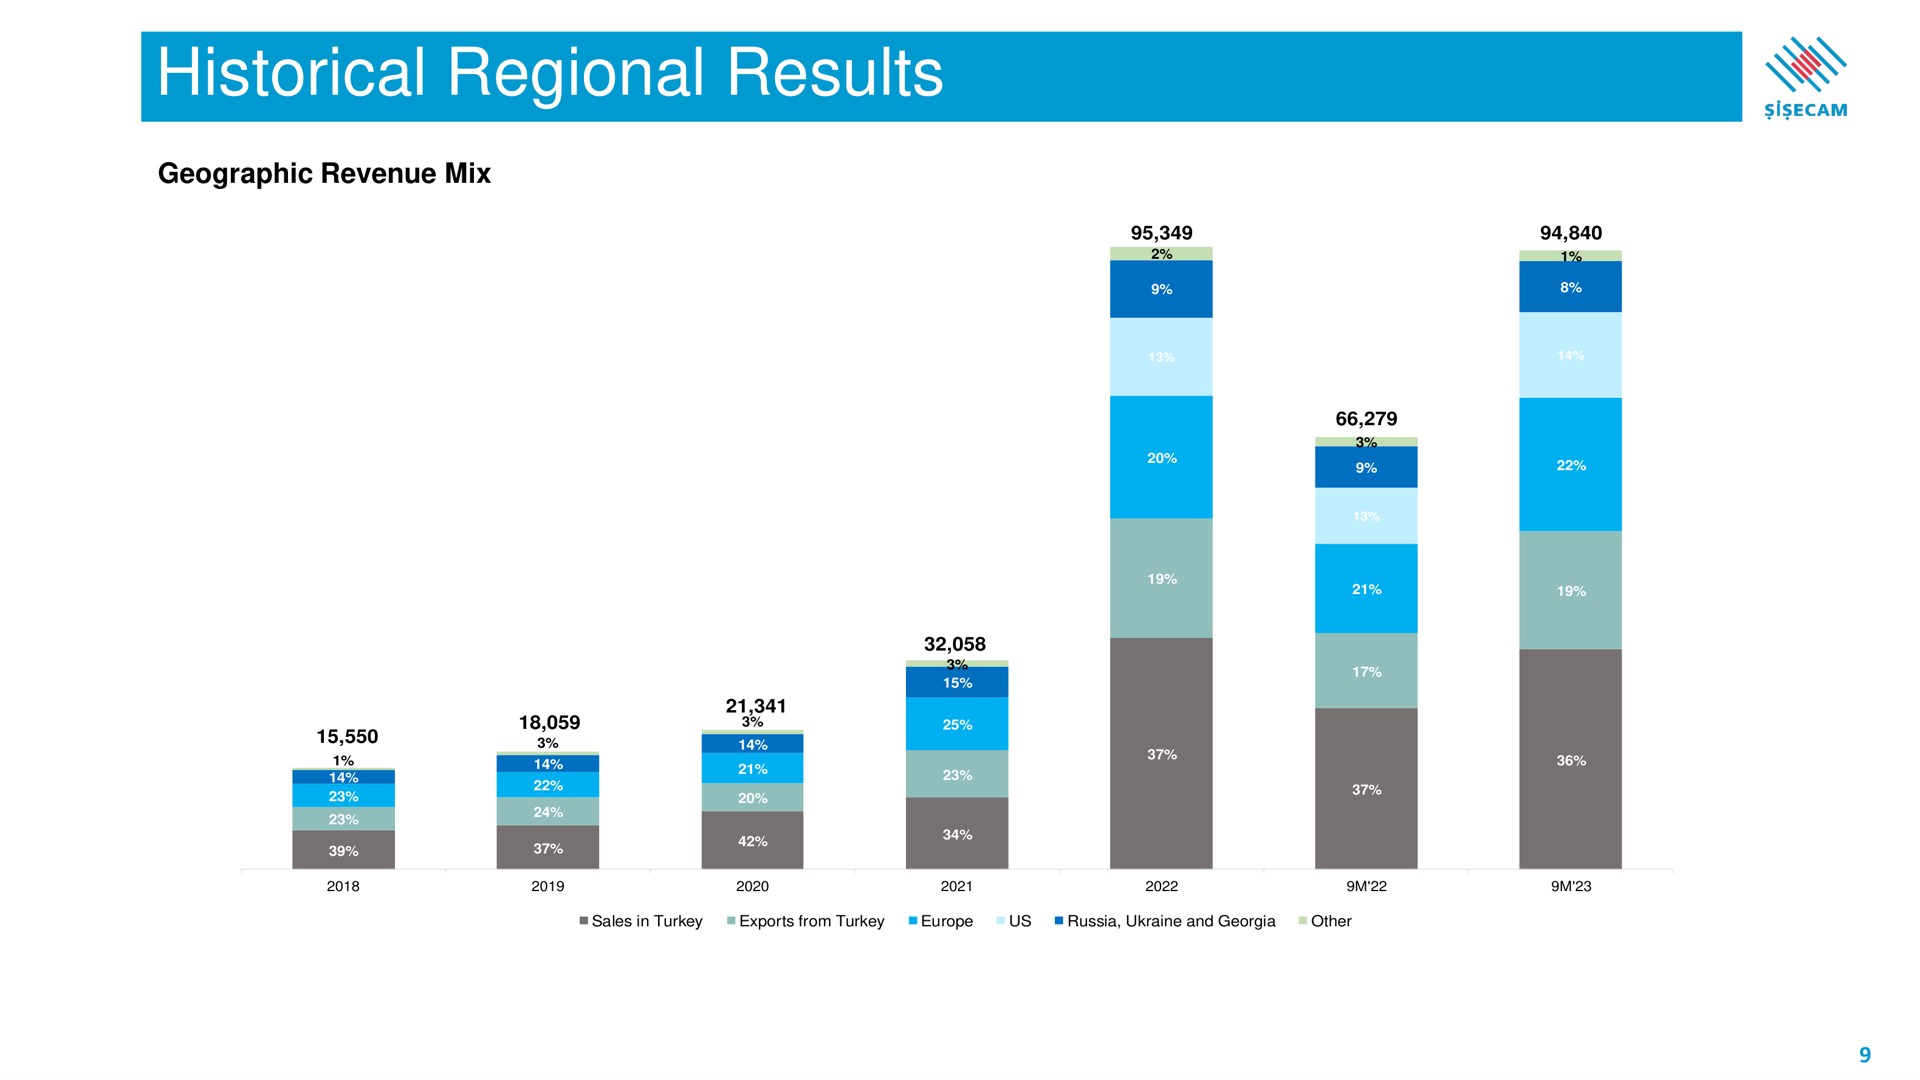 historical regional results | Sisecam Resources